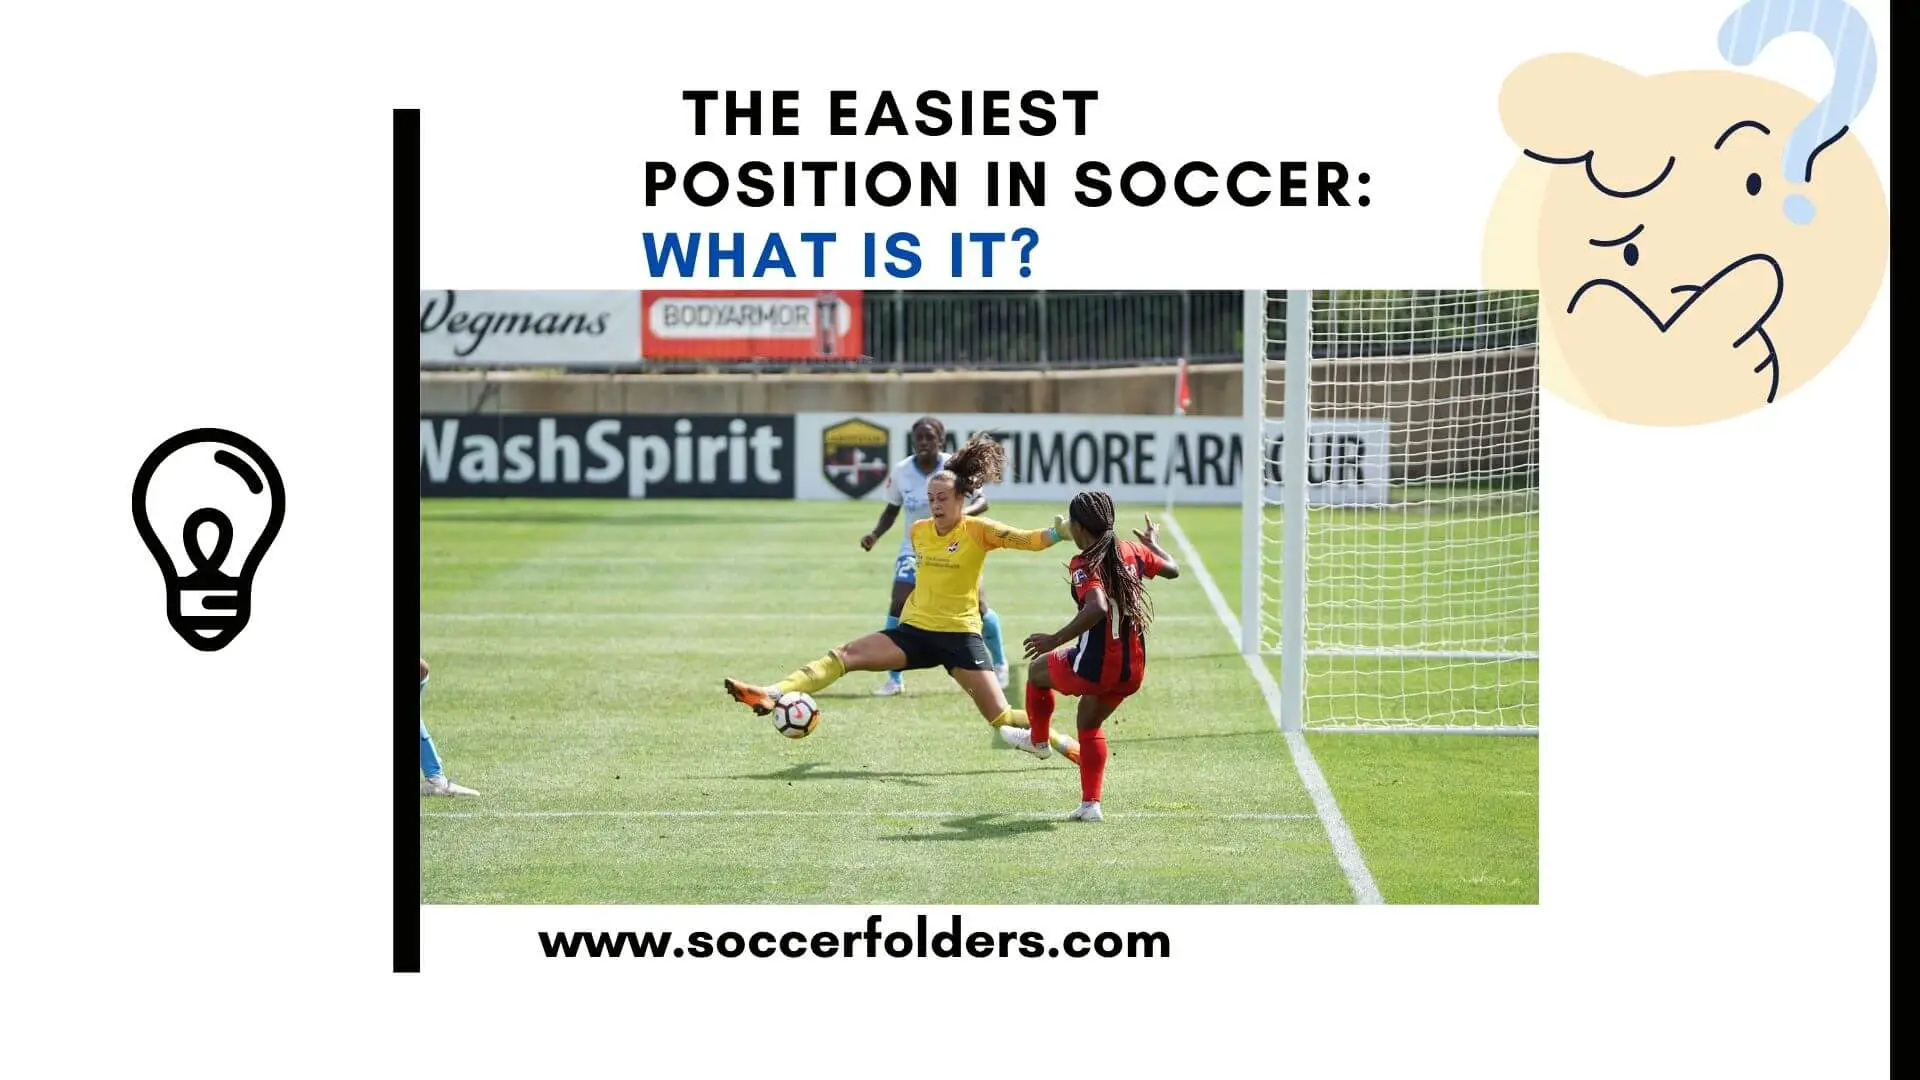 The easiest position in soccer - Featured Image